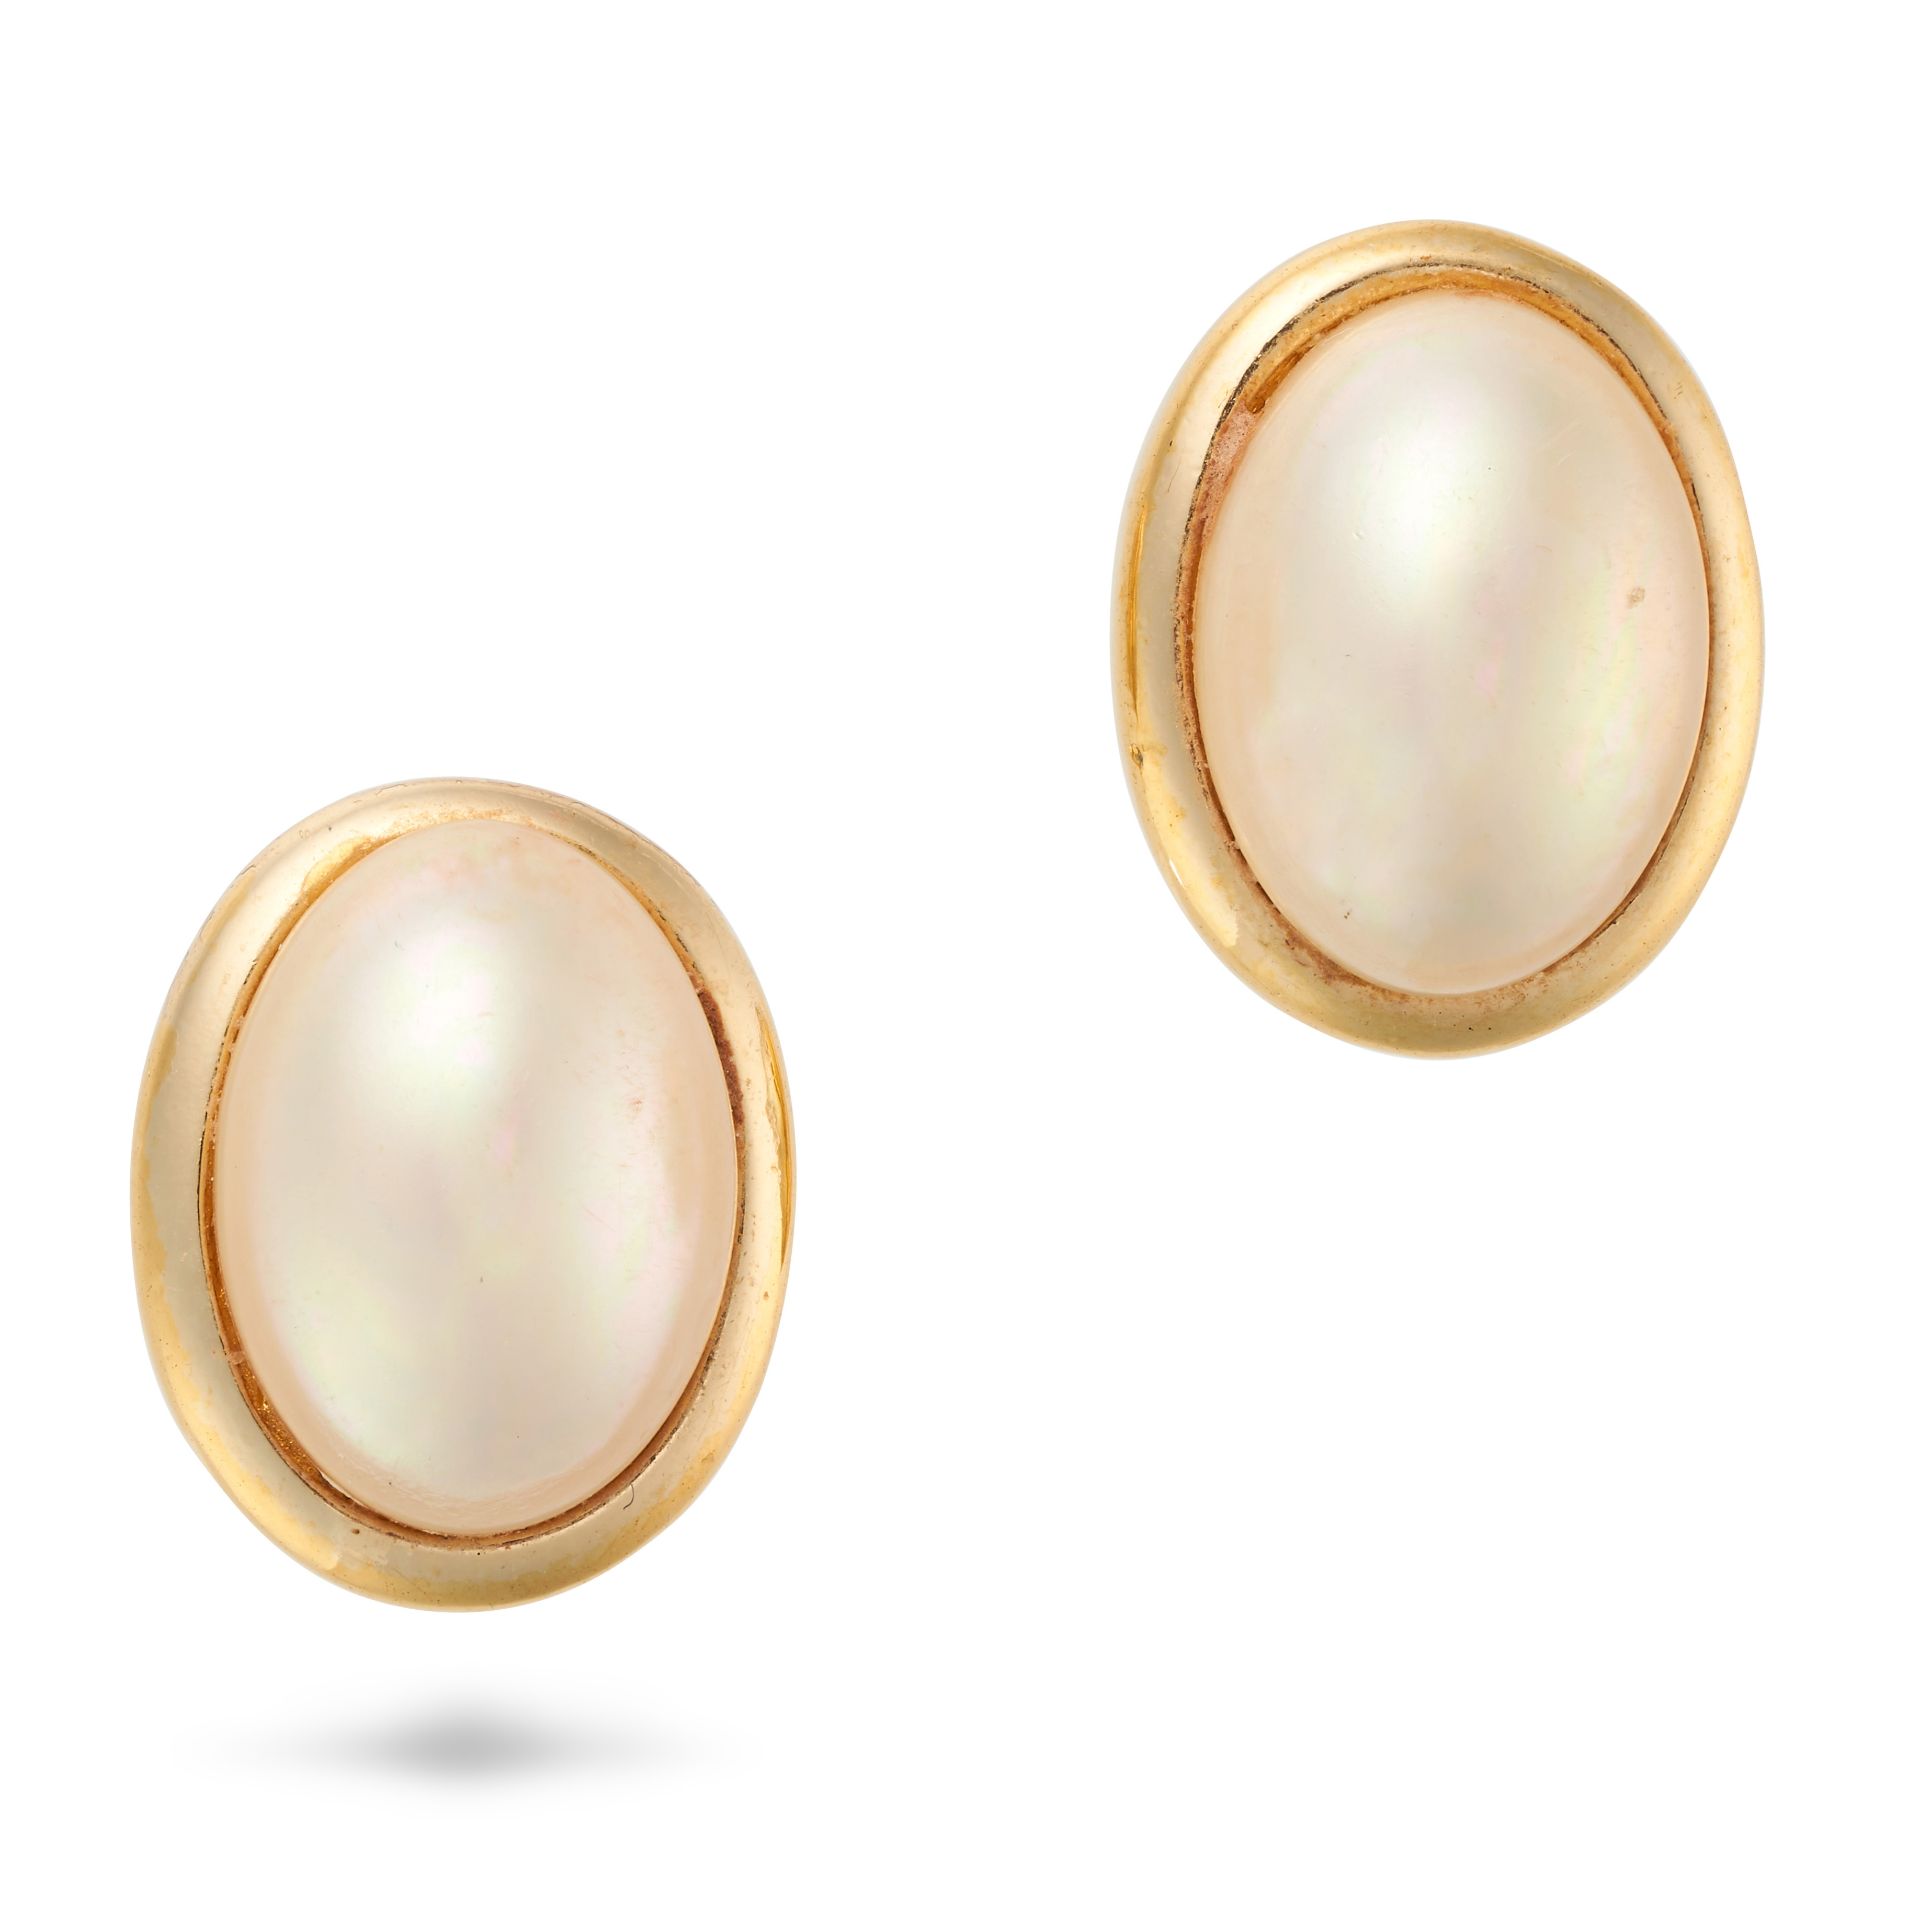 NO RESERVE CHRISTIAN DIOR FAUX PEARL CLIP EARRINGS